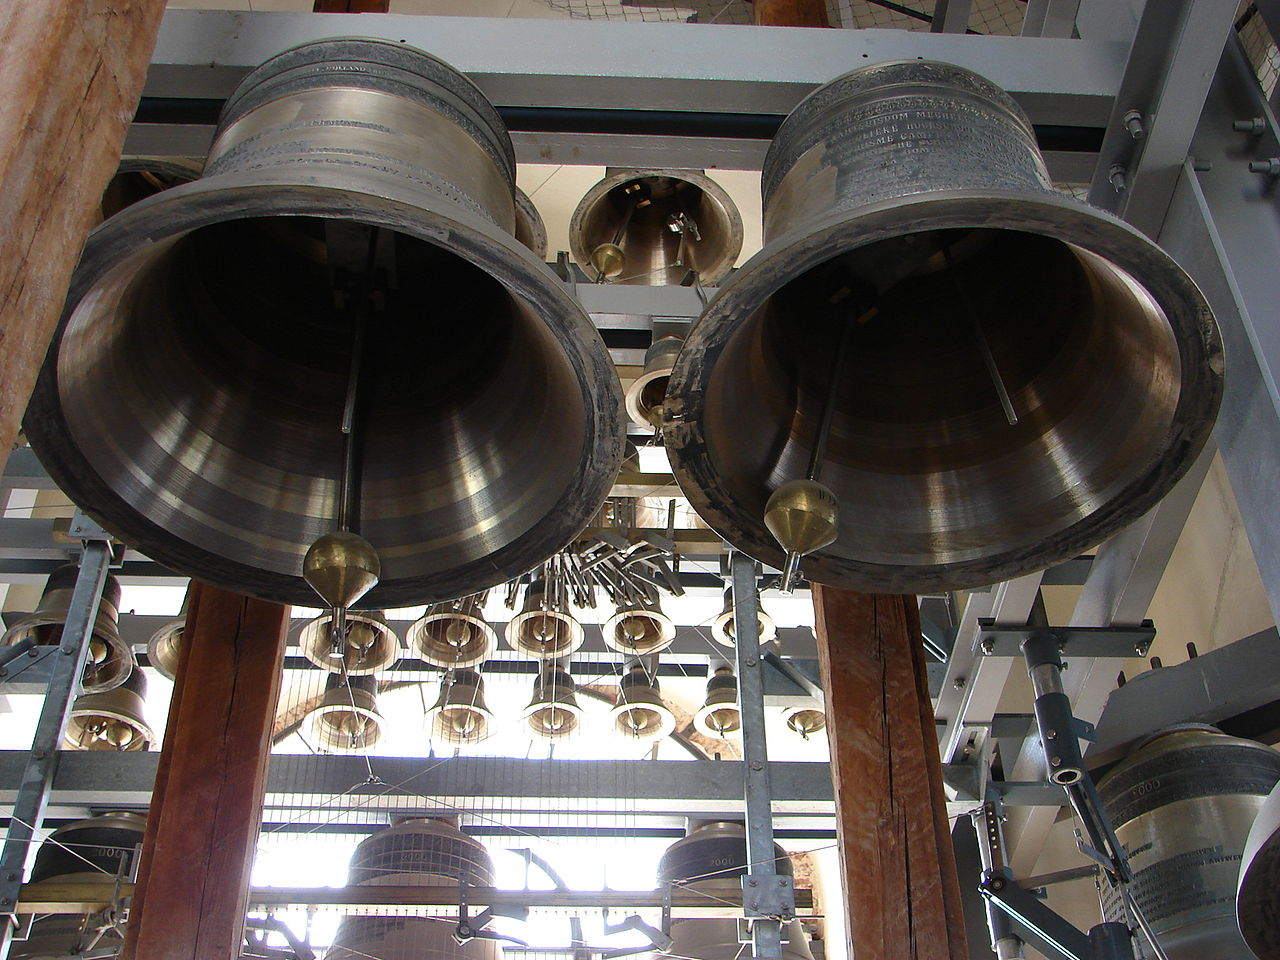 A photo of the carillon bells in St. Petersburg